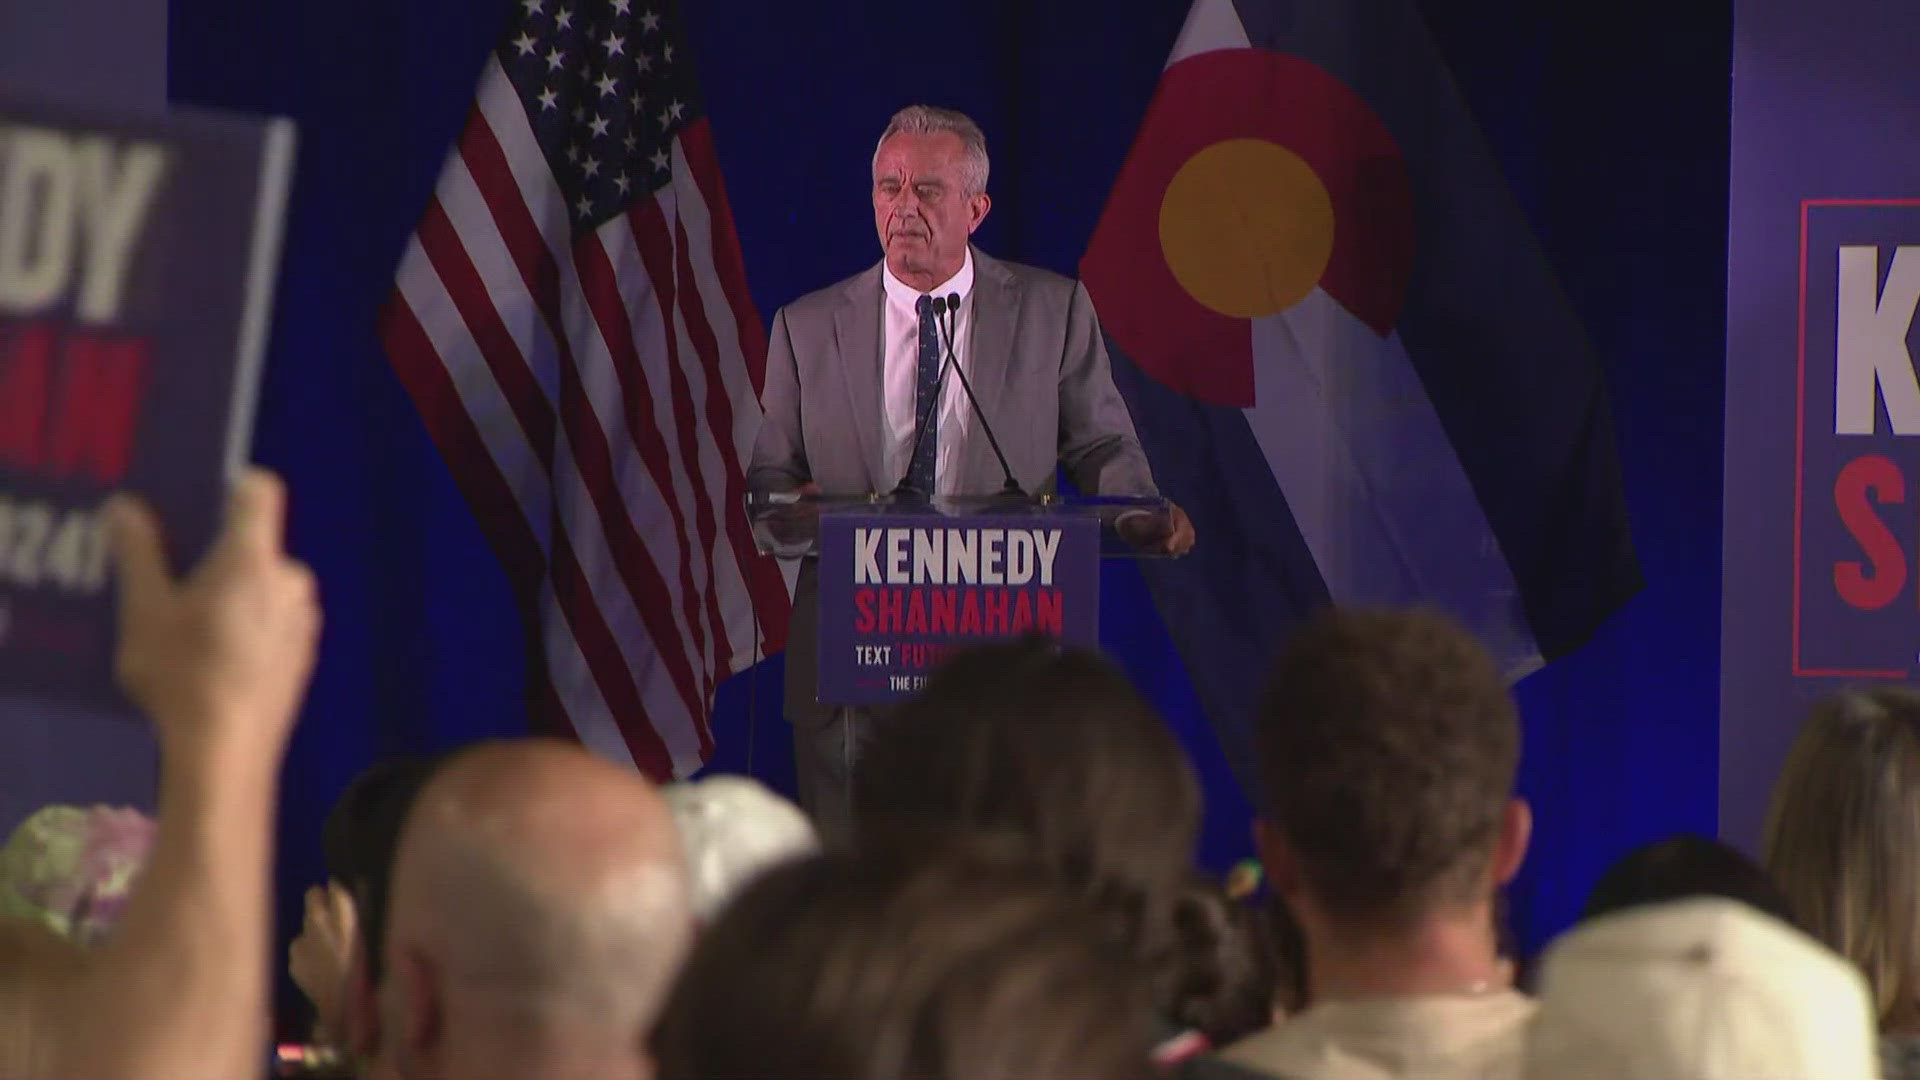 Independent presidential candidate Robert F. Kennedy Jr. made a campaign stop in Aurora Sunday.